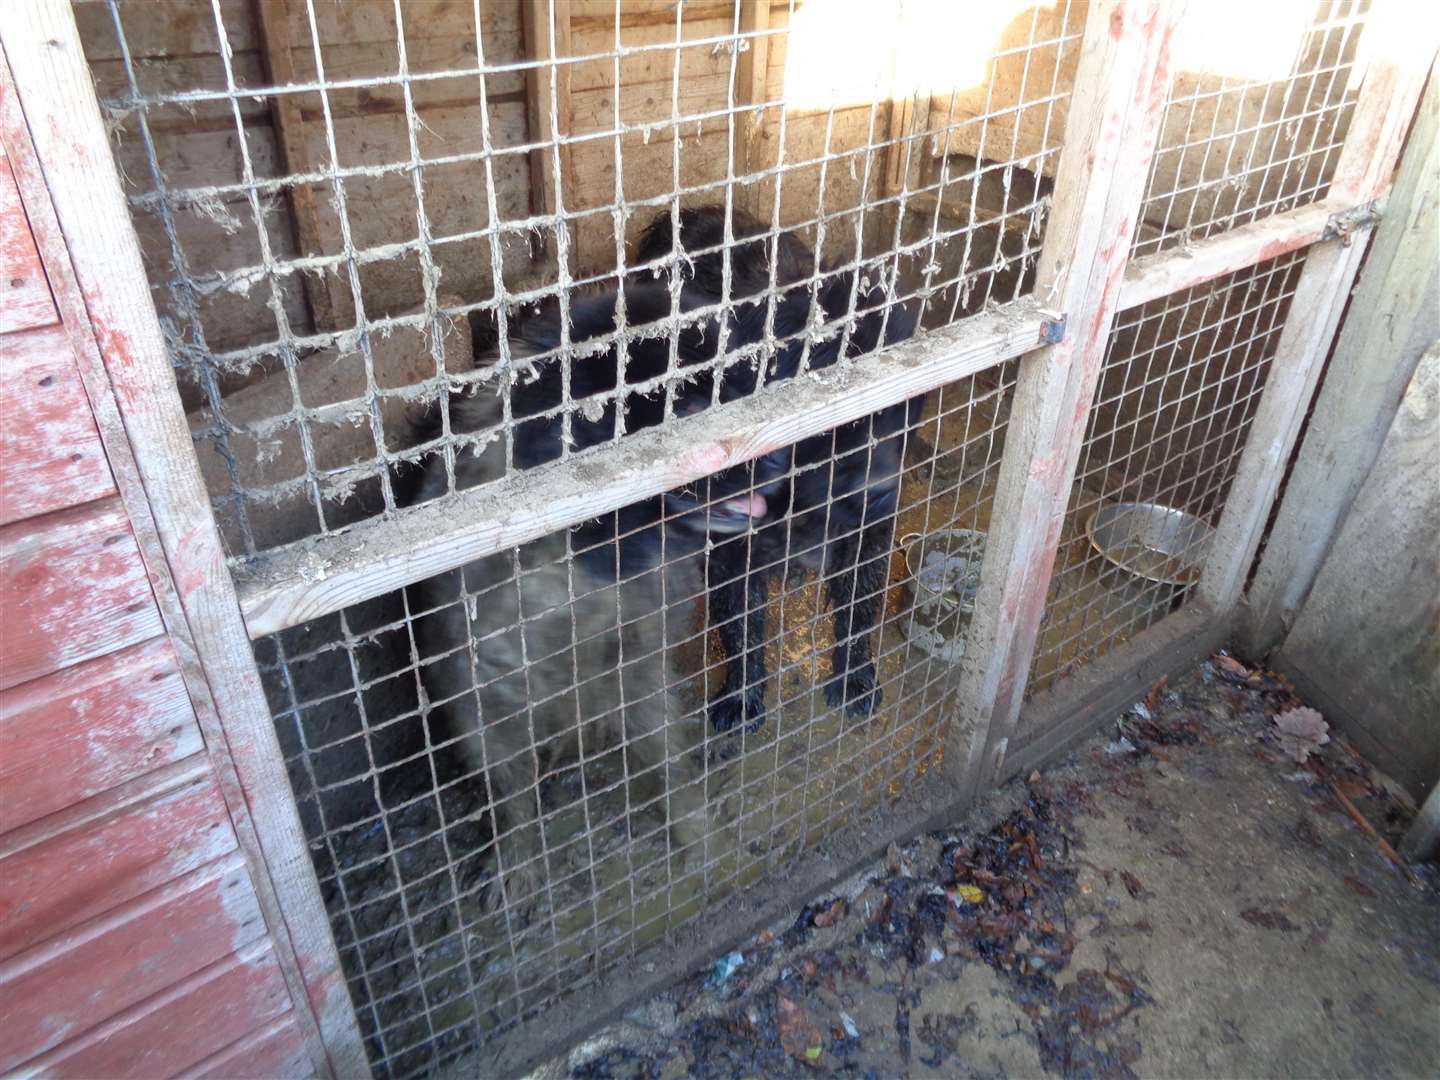 Some of the conditions officers found after searching the Bexleyheath property. Picture: RSPCA